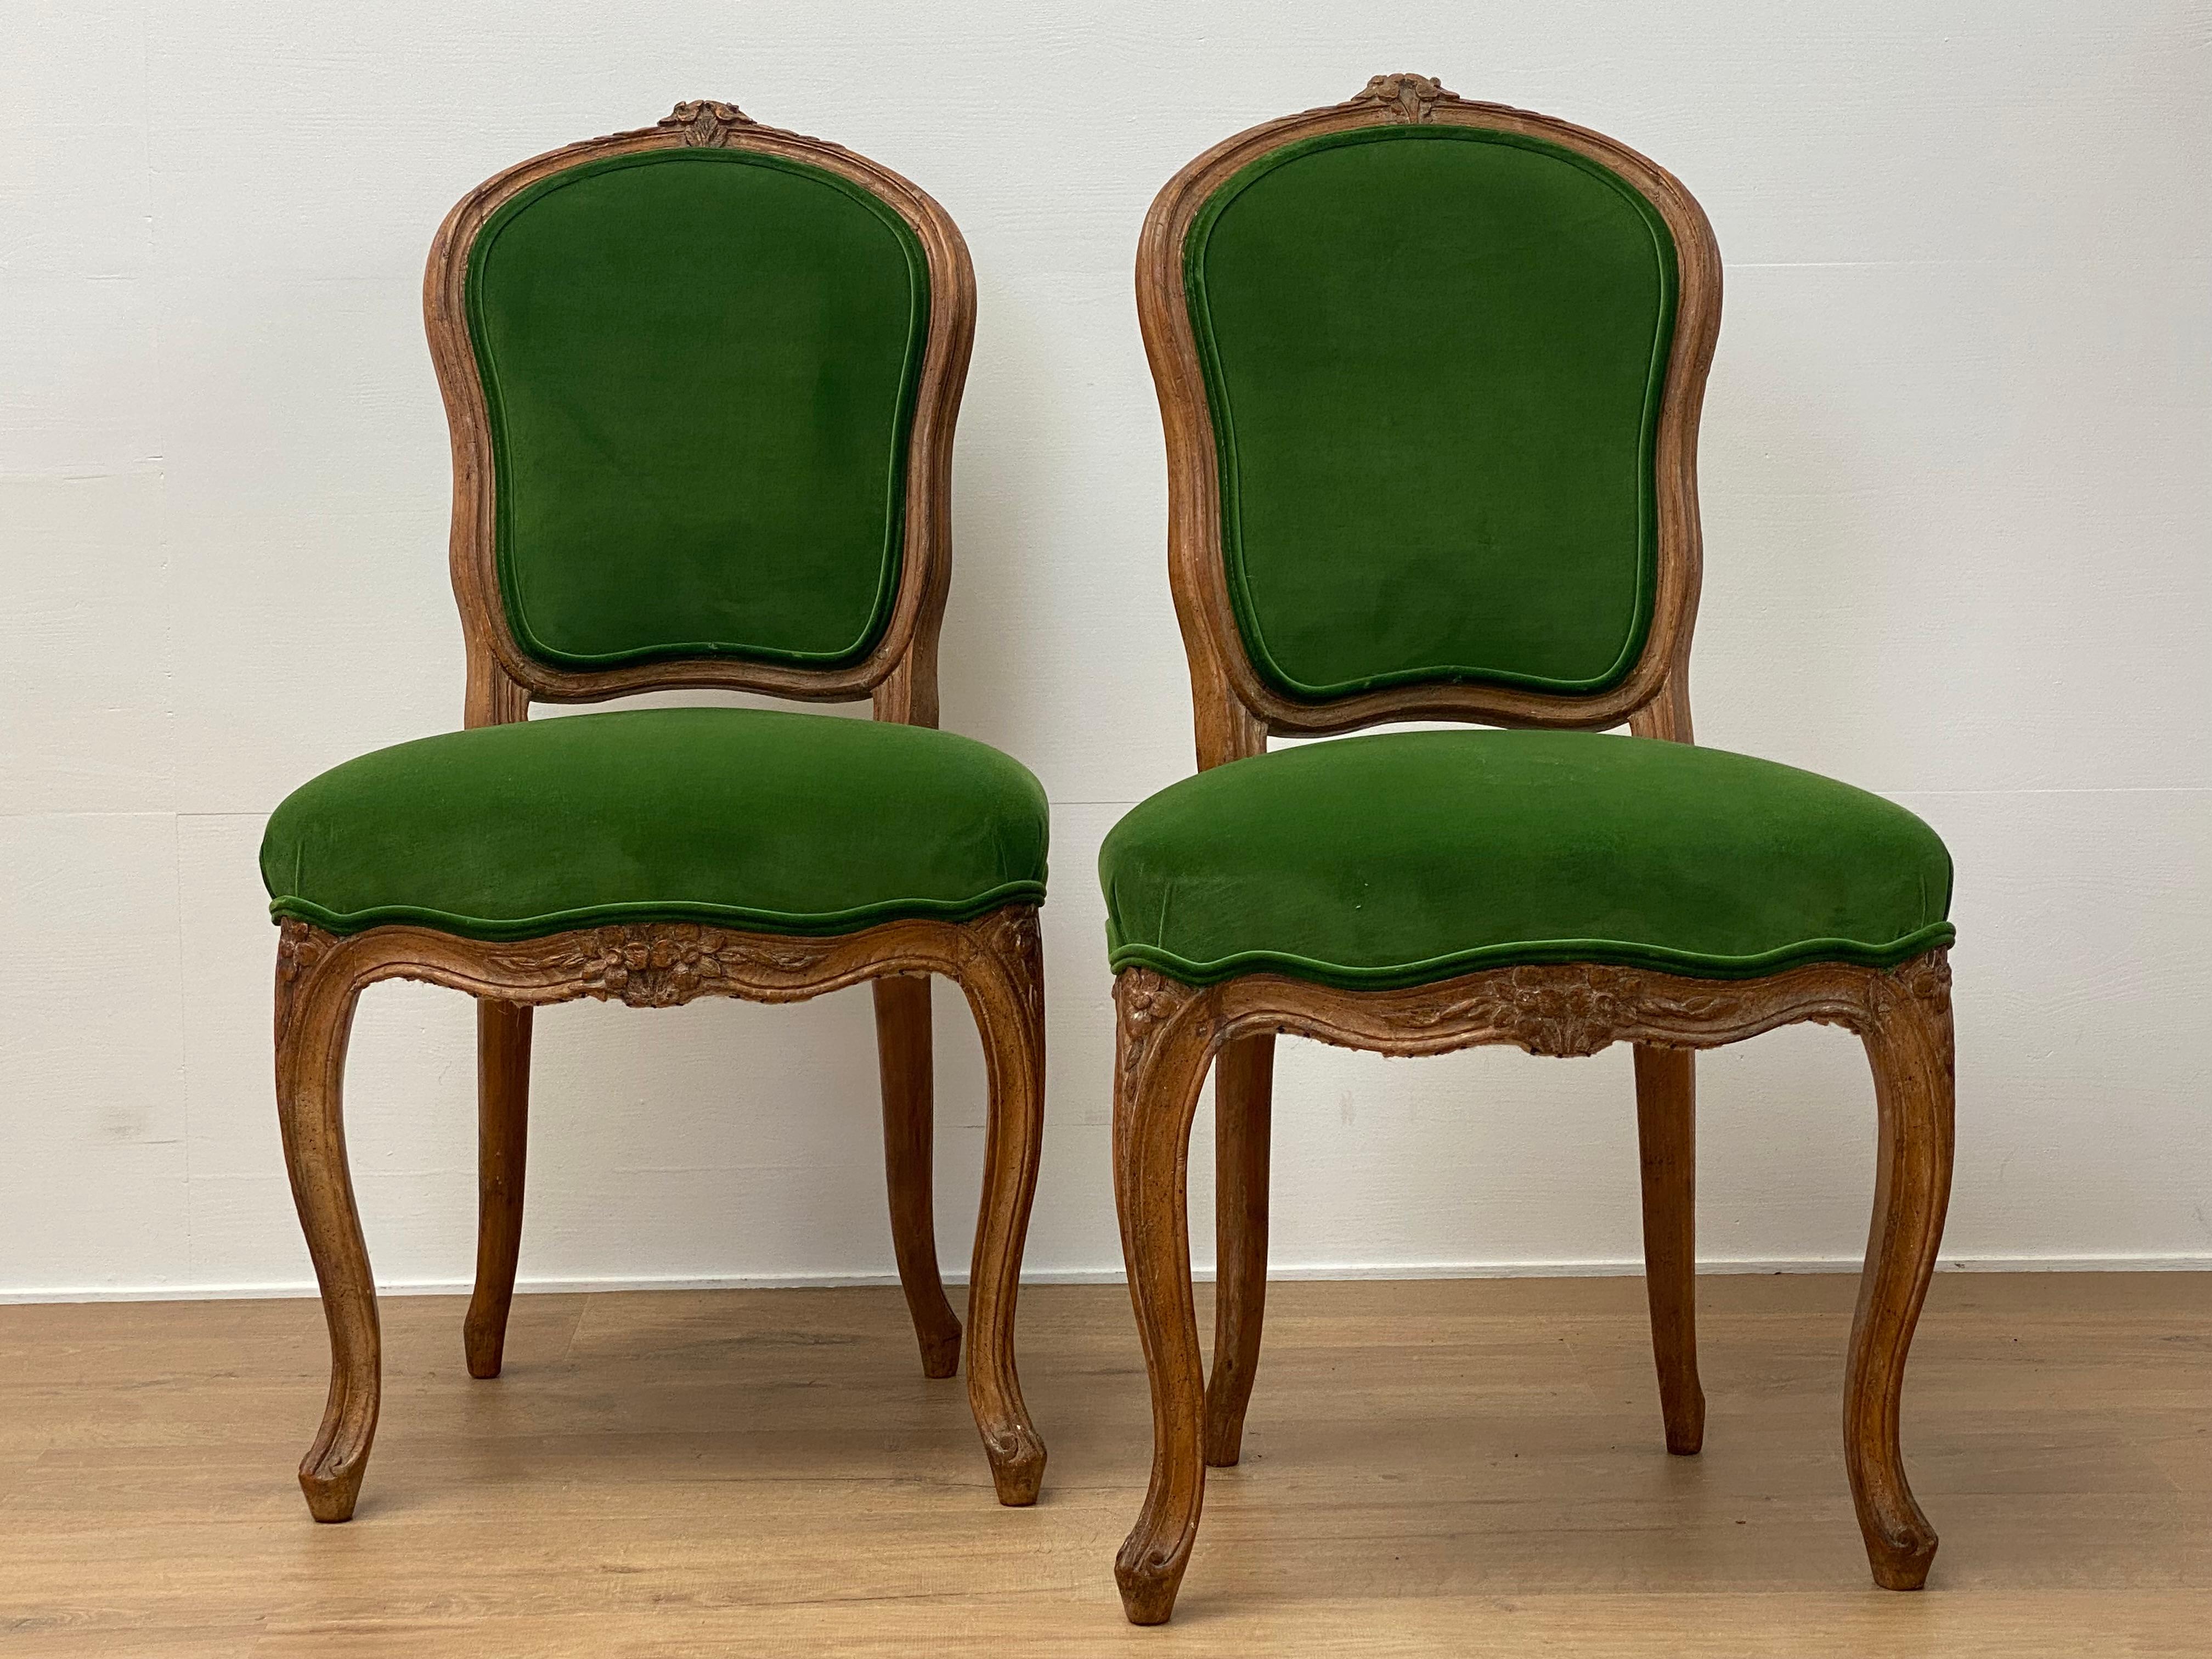 Elegant , Antique Pair of LOUIS XVI Chairs , d Epoque,
the chairs are in a nice Blond colored Oak and have a great old patina and shine of the wood,
the chairs are newly upholstered in a flashy Green Velvet fabric,
comfortable seating